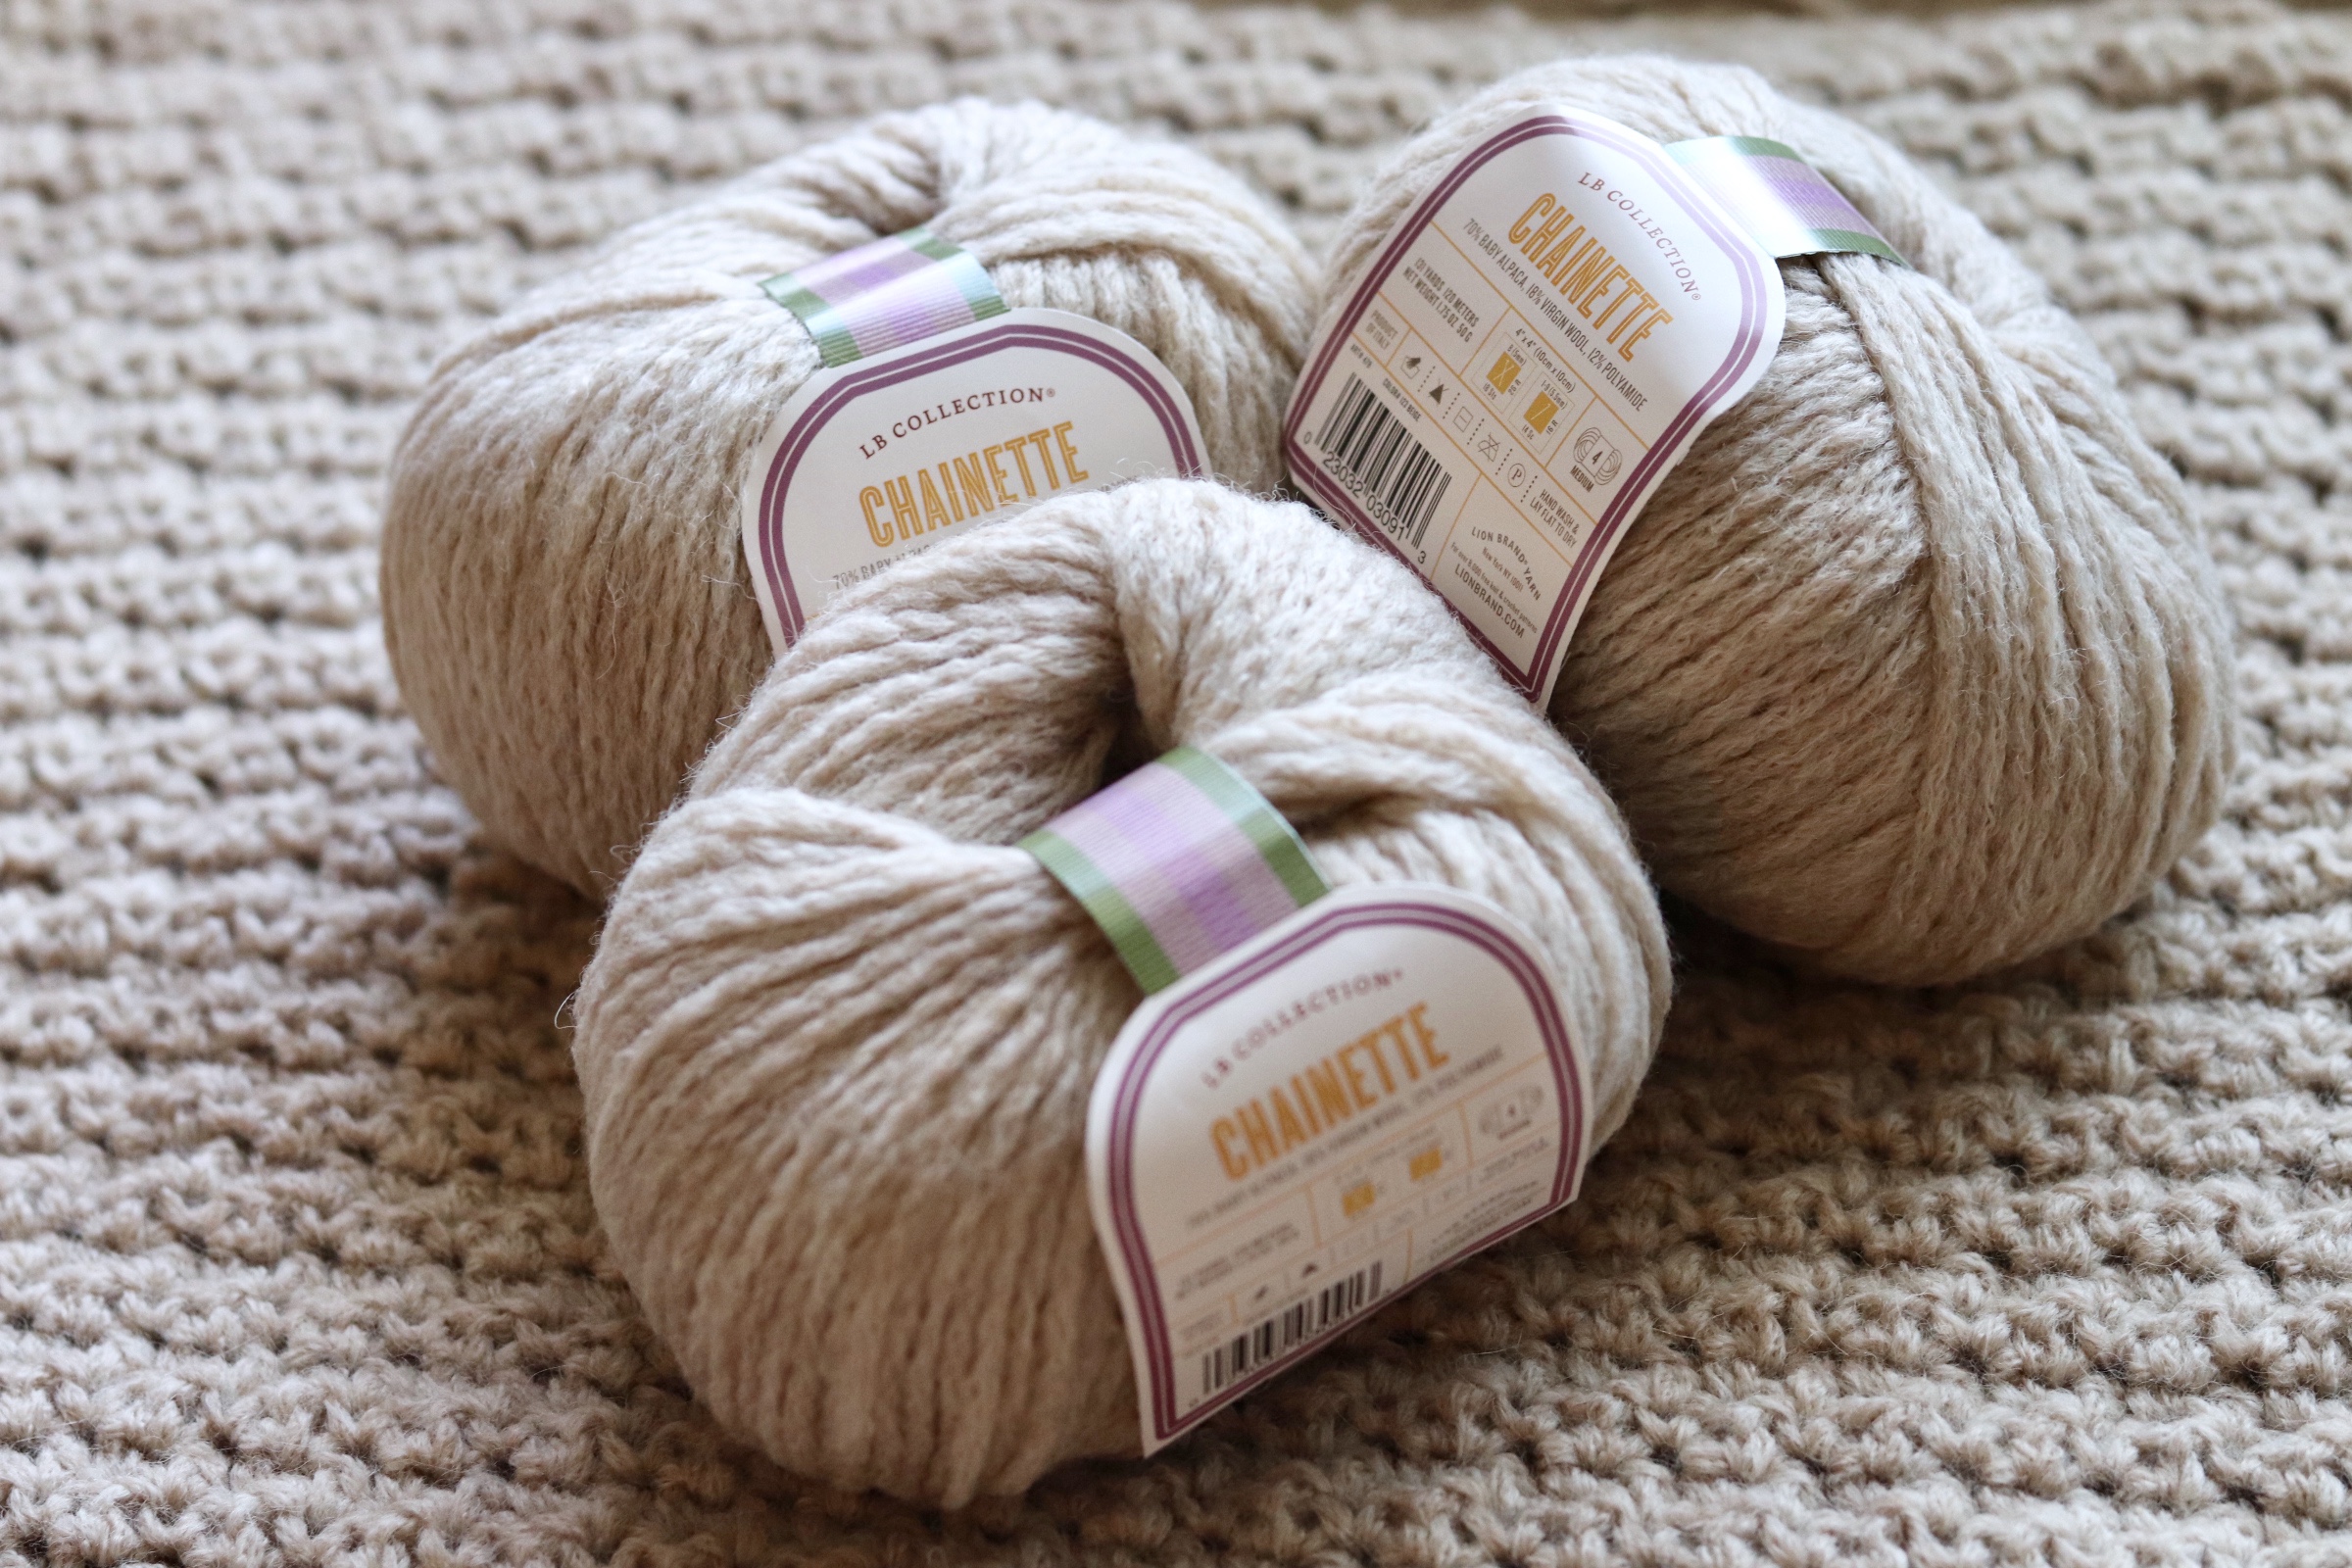 Fiber Friday – Lion Brand “Chainette” Yarn Review - Knits 'N Knots